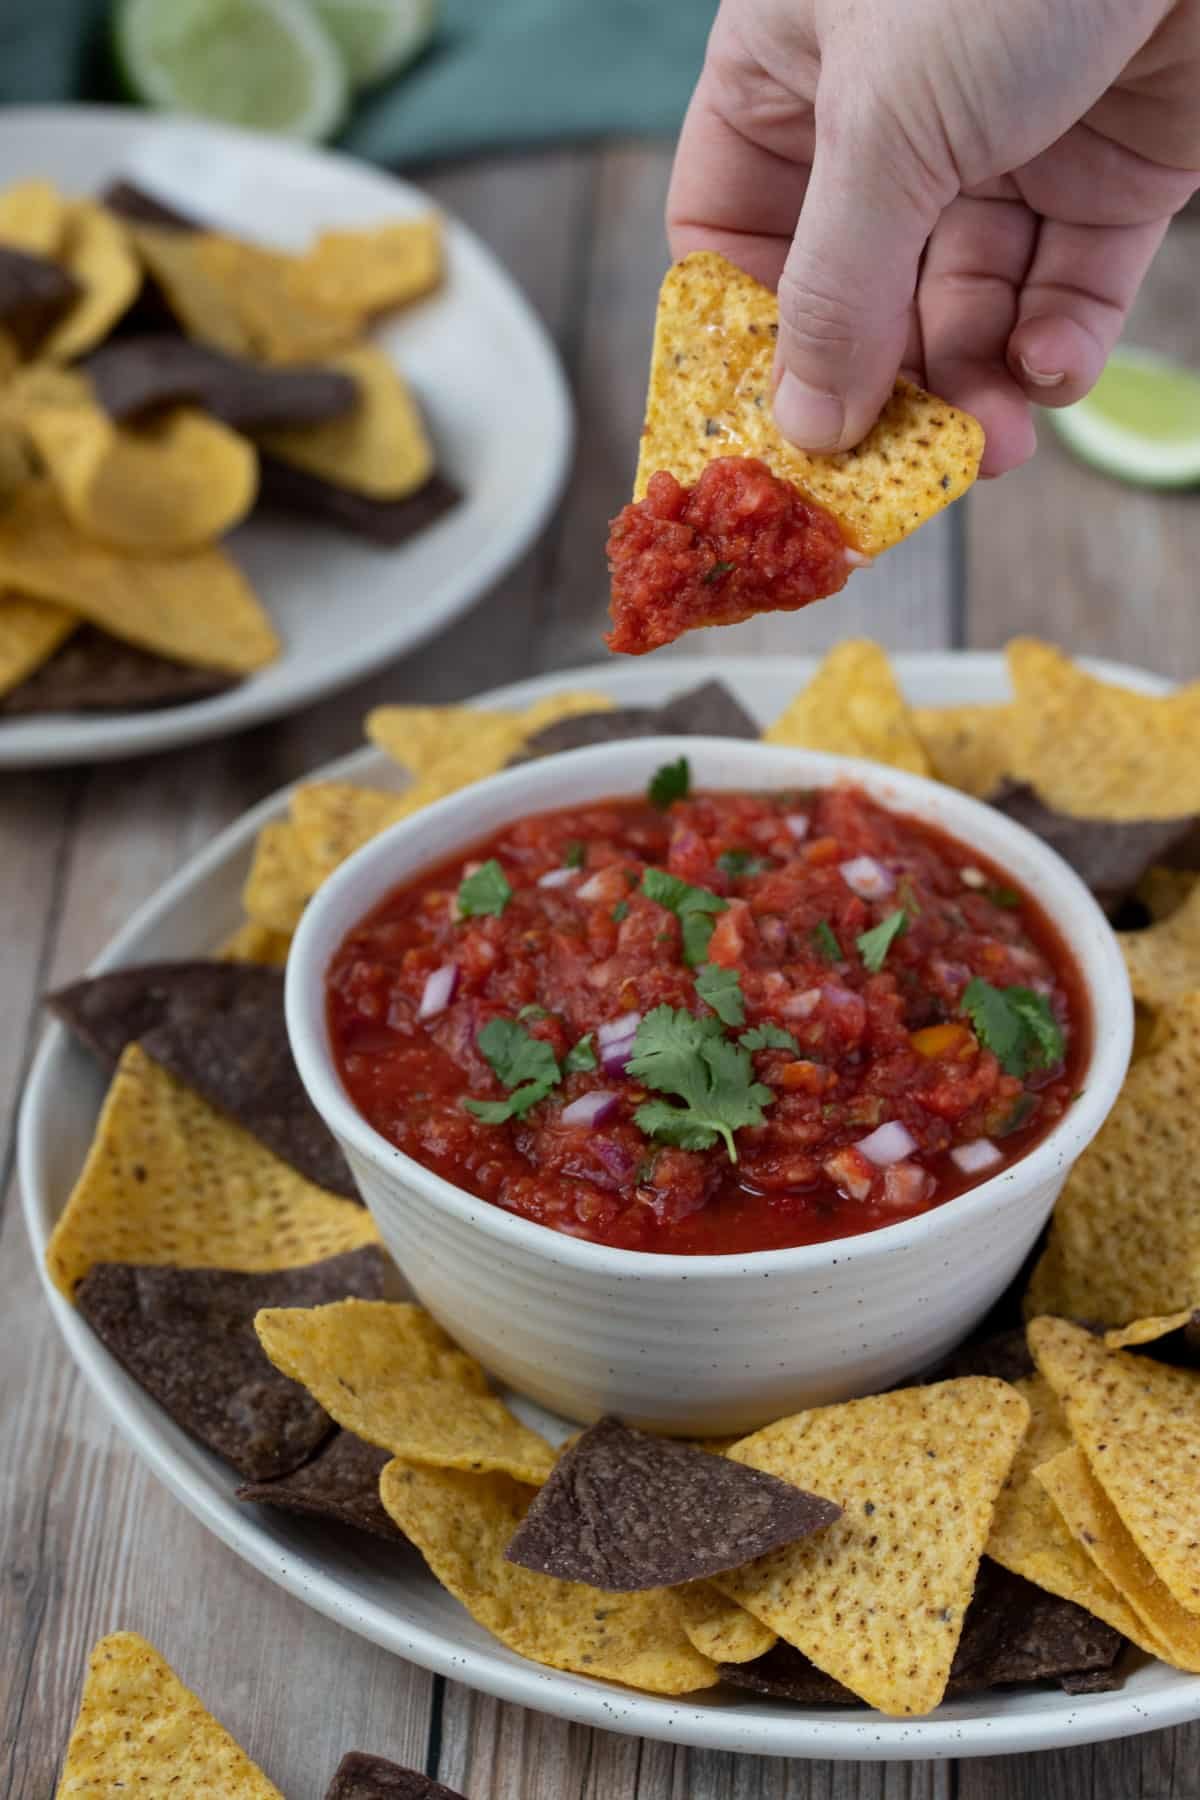 a hand dipping a corn chip into a bowl of salsa.